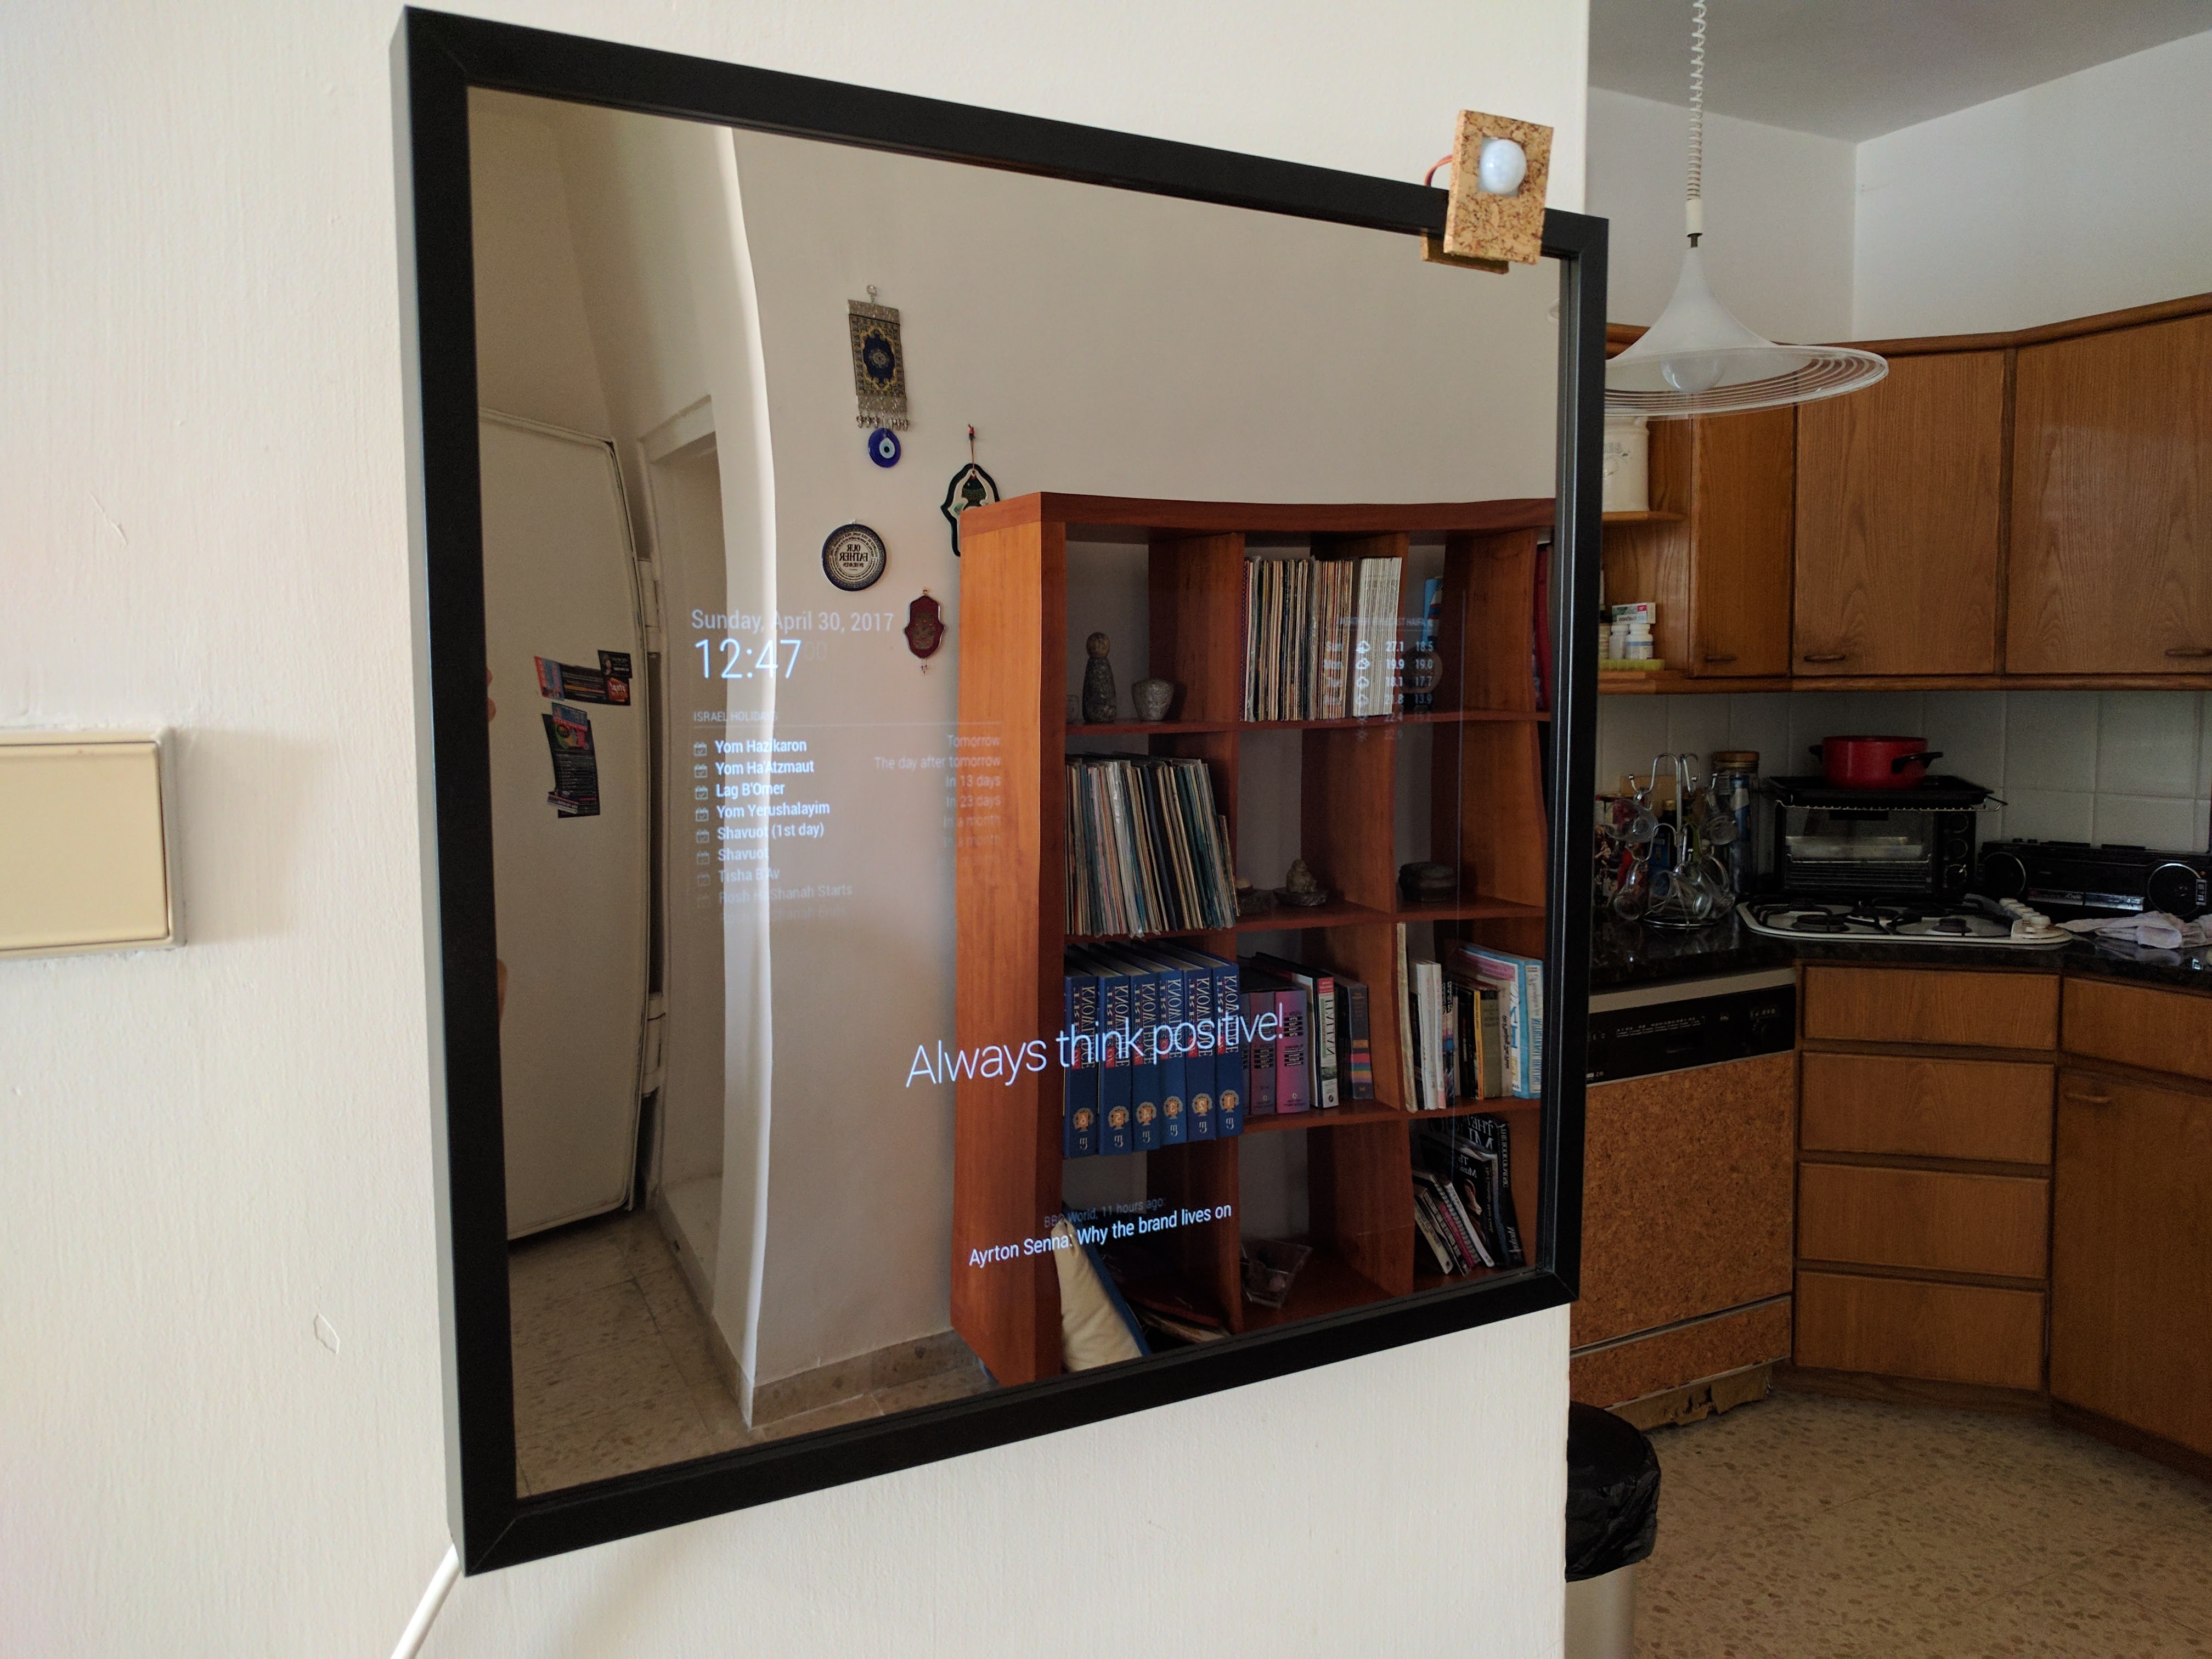 Construct a MagicMirror with a Raspberry Pi and inexpensive IKEA frame.